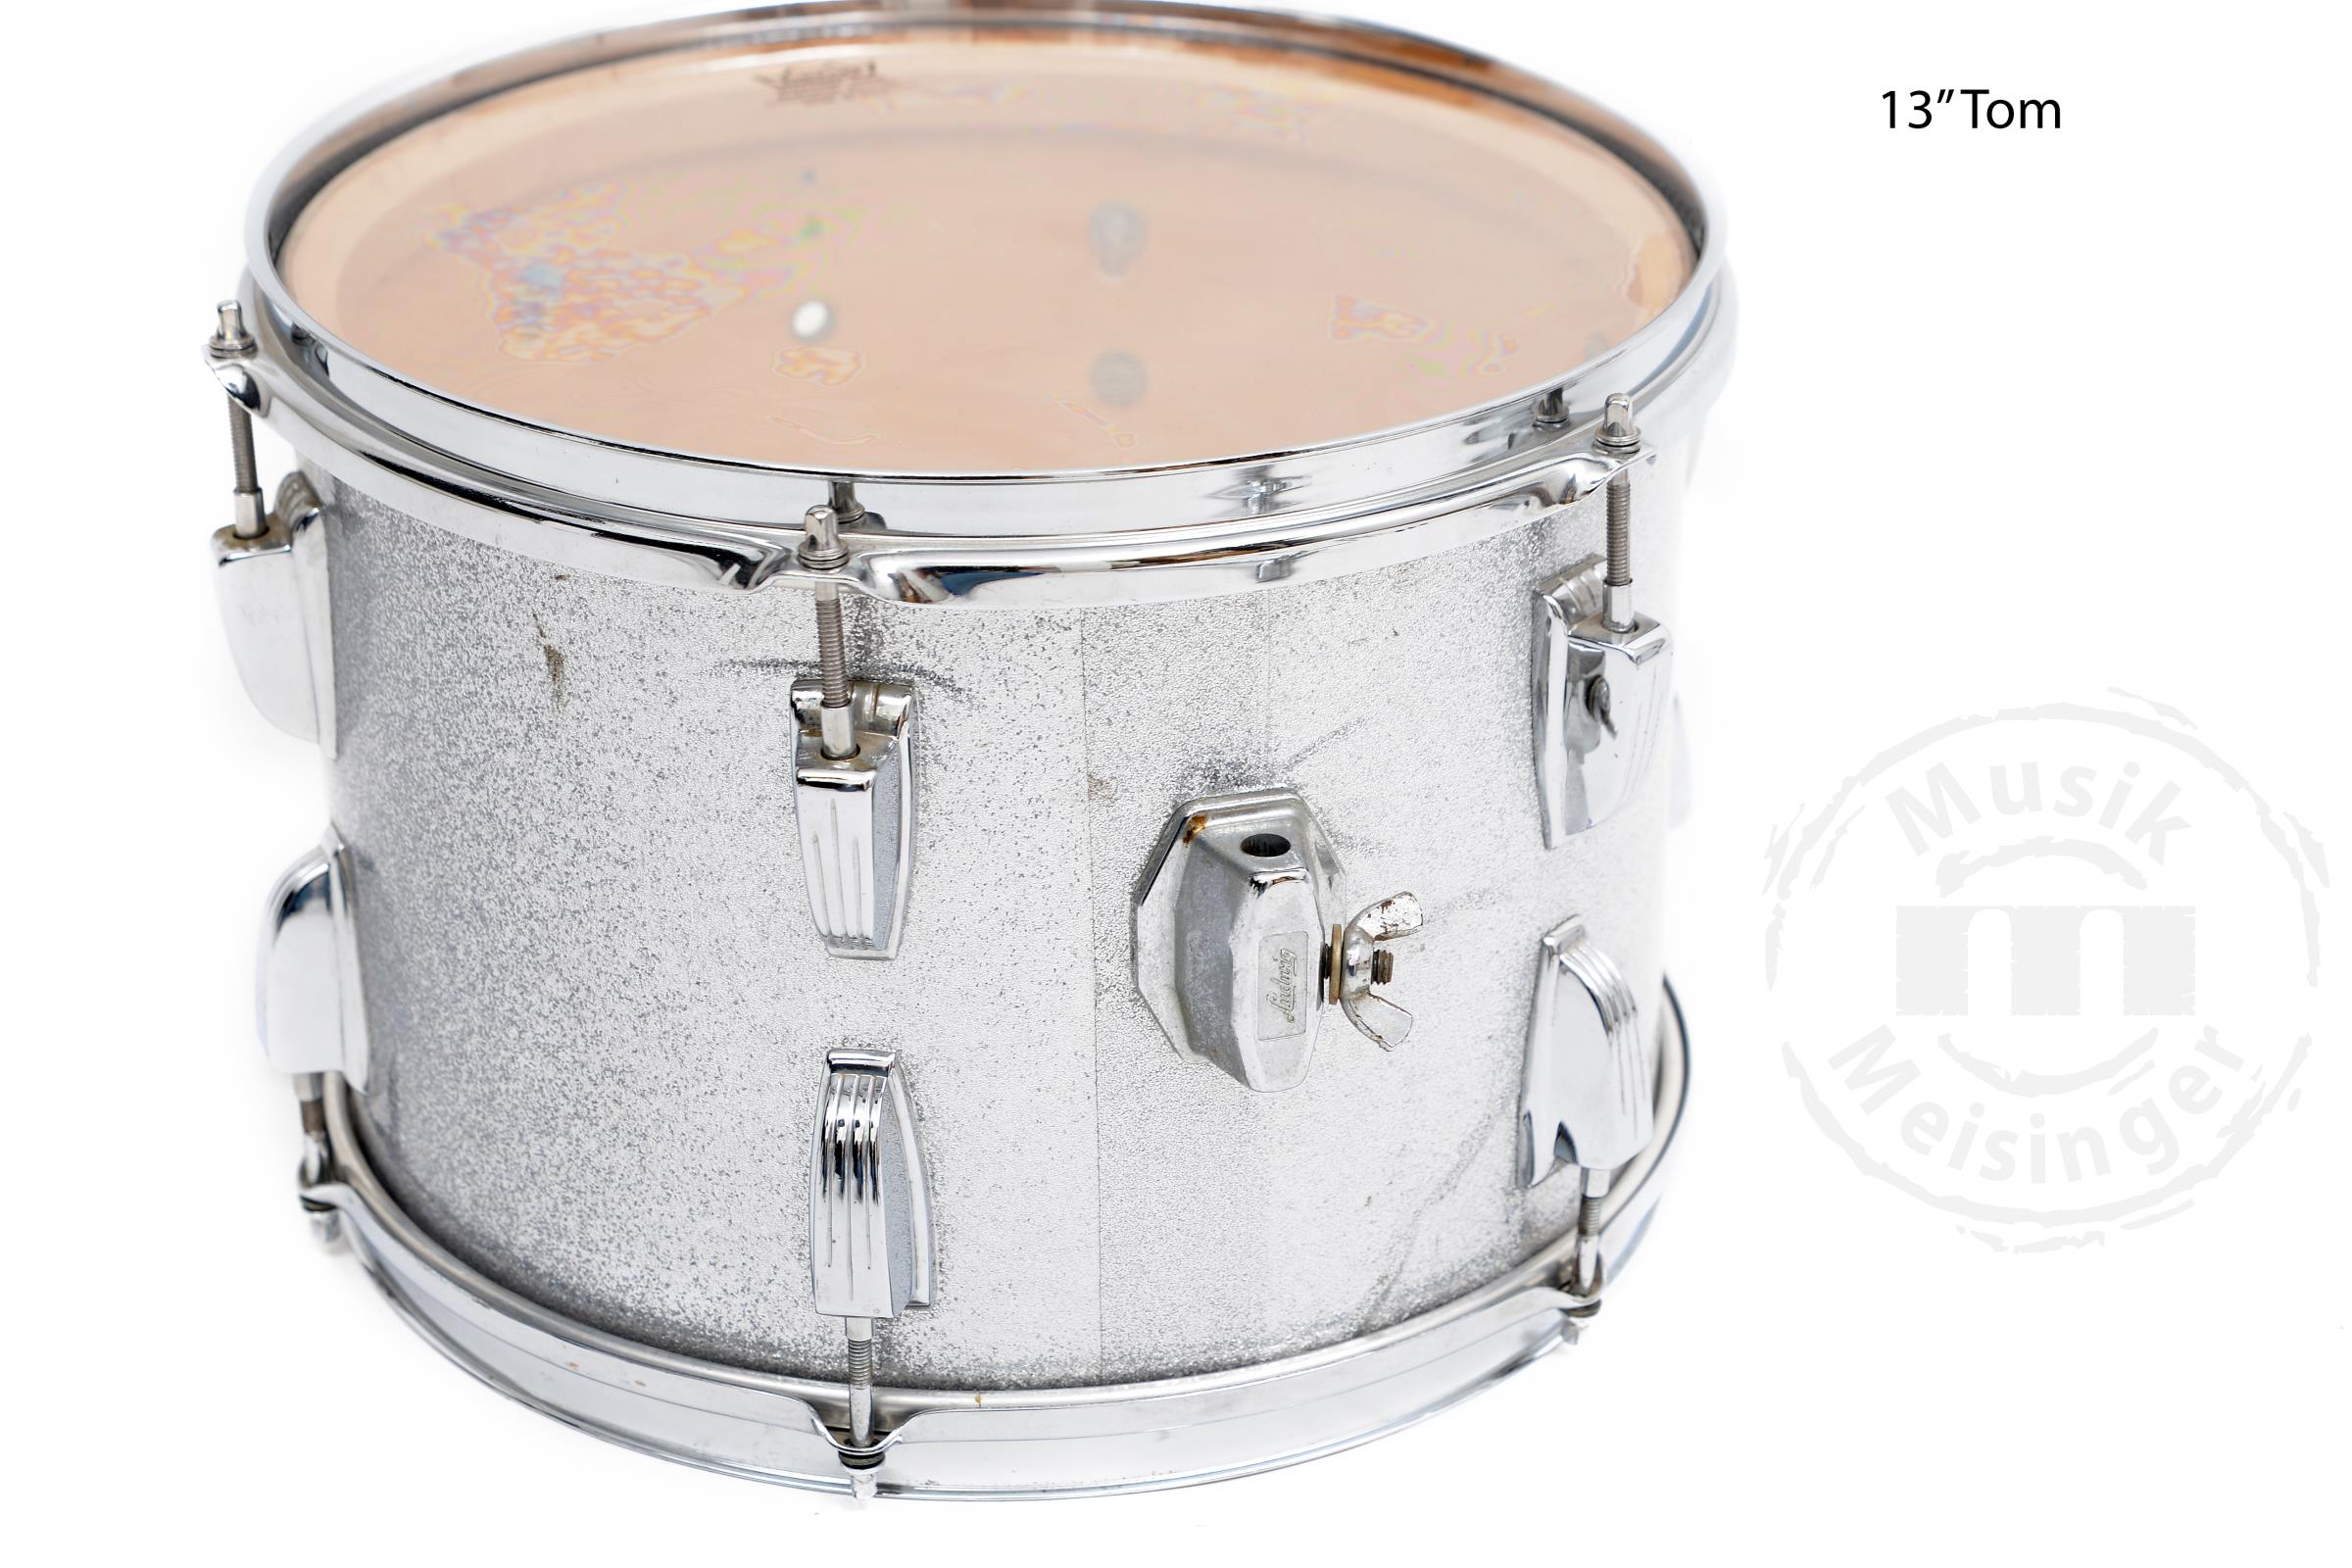 Ludwig 22B/12T/13T/15FT Silver Sparkle